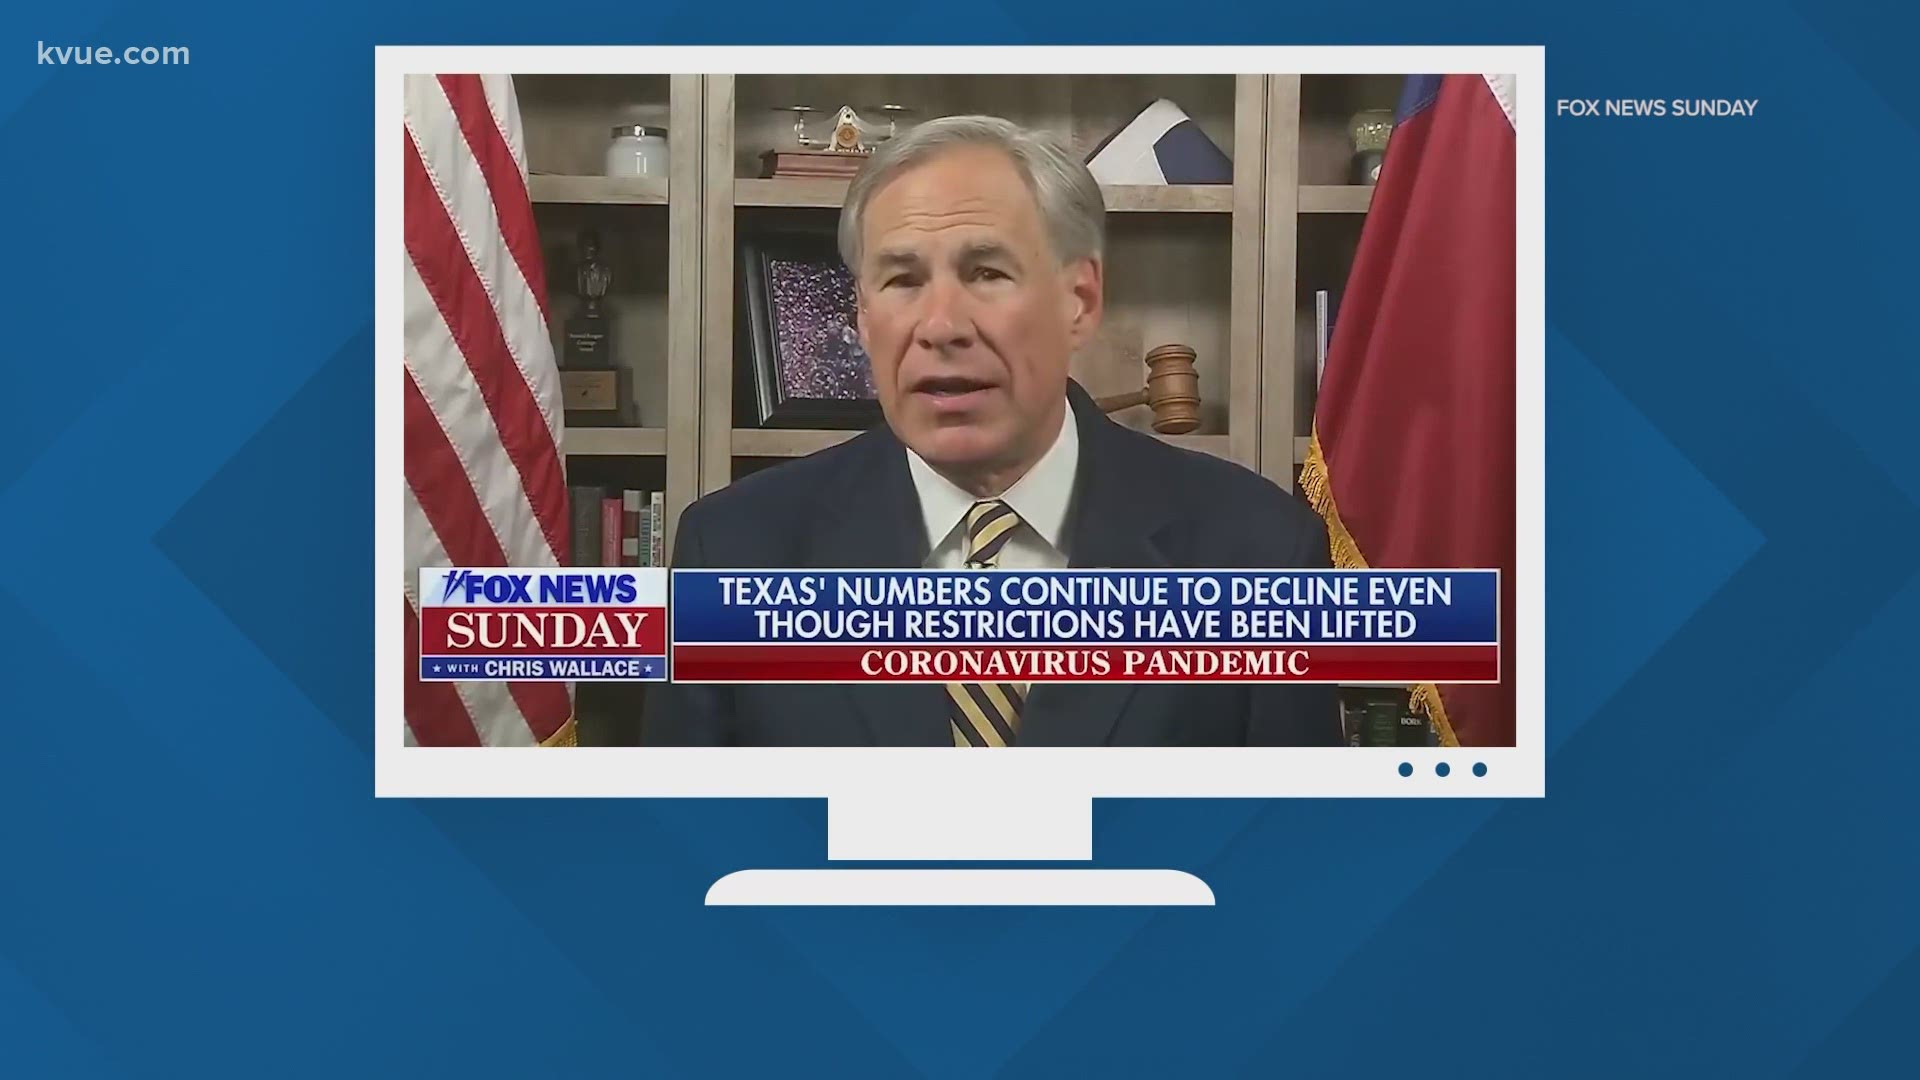 In an interview with Fox News, Gov. Greg Abbott said Texas looks like it could "be very close to herd immunity" from COVID-19. KVUE verified.